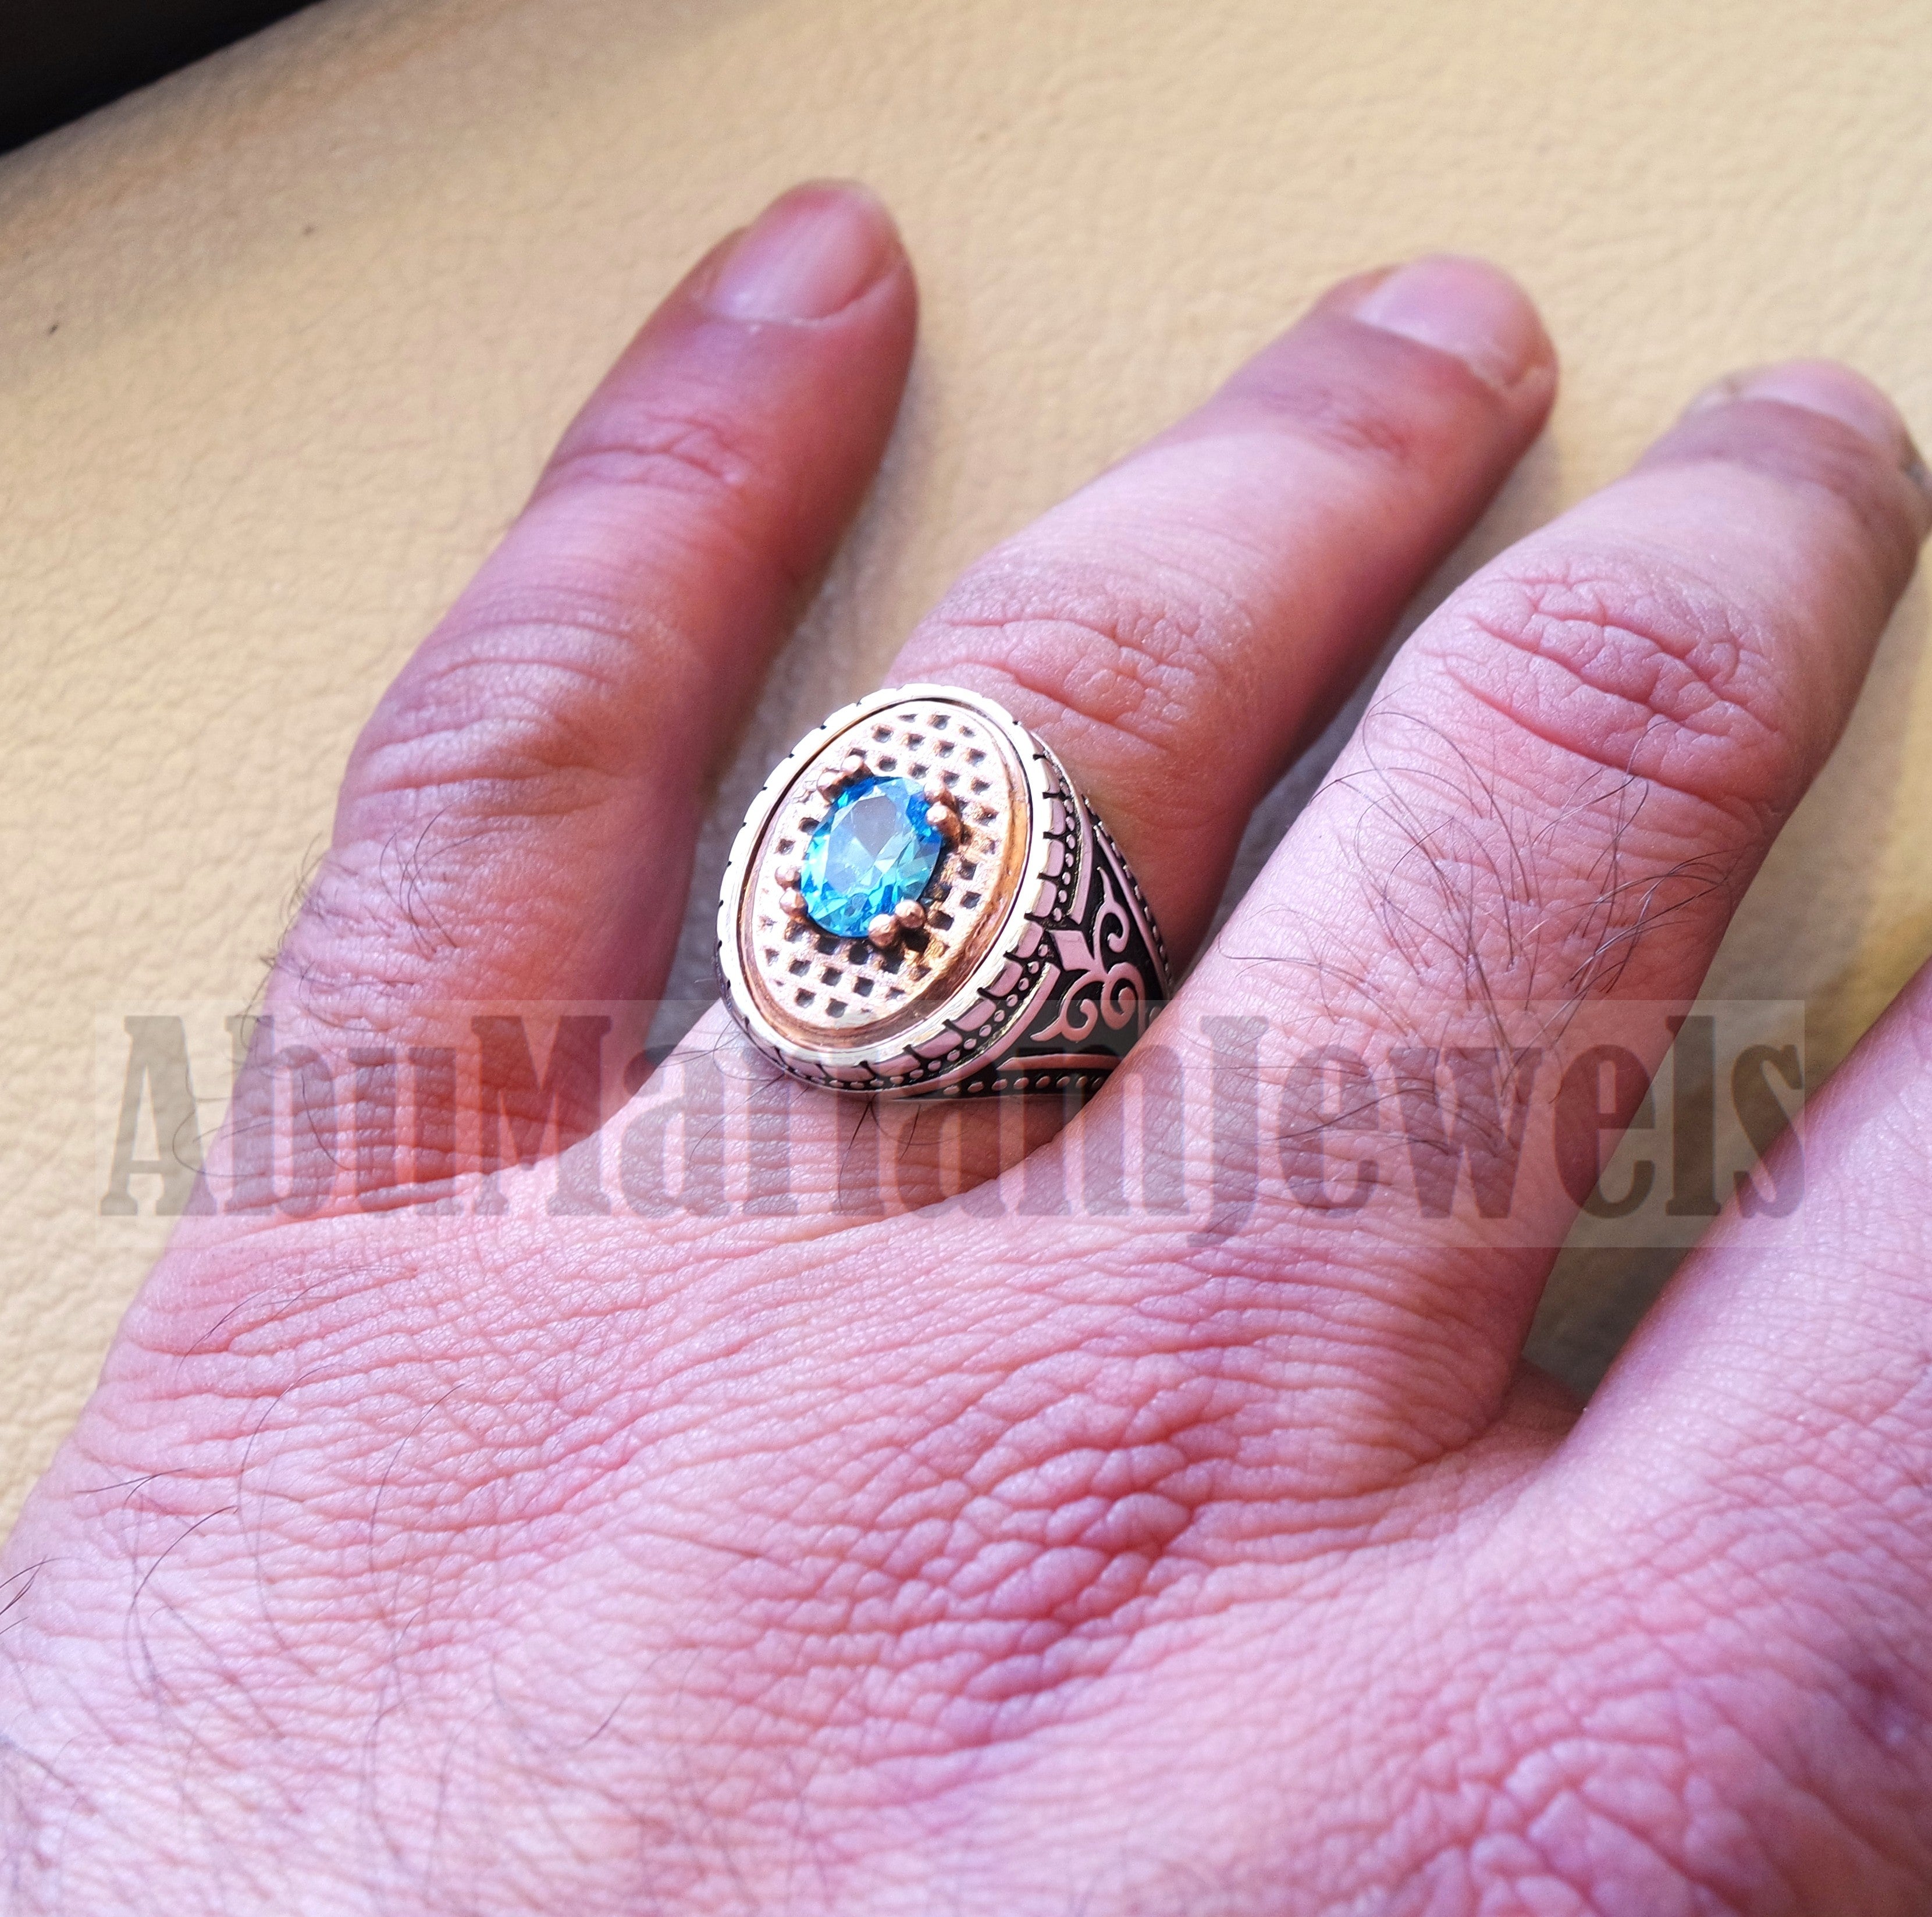 deep vivid sky blue cubic zirconia oval stone highest quality stone sterling silver 925 men ring and bronze frame all sizes jewelry Br102